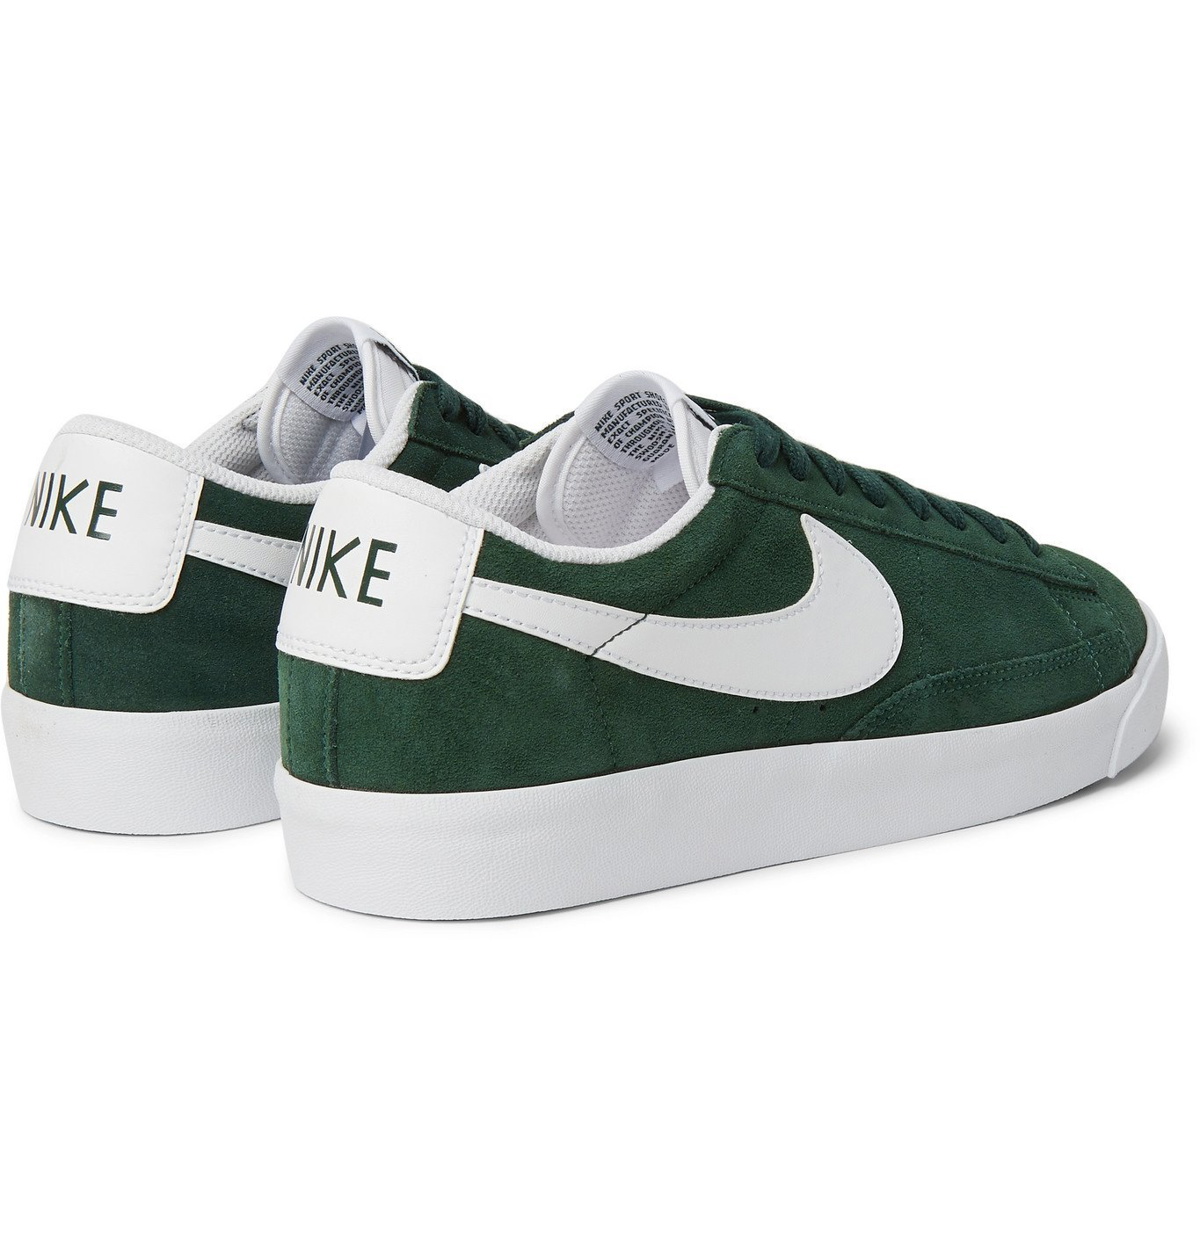 NIKE - Low Leather-Trimmed Suede Sneakers Green